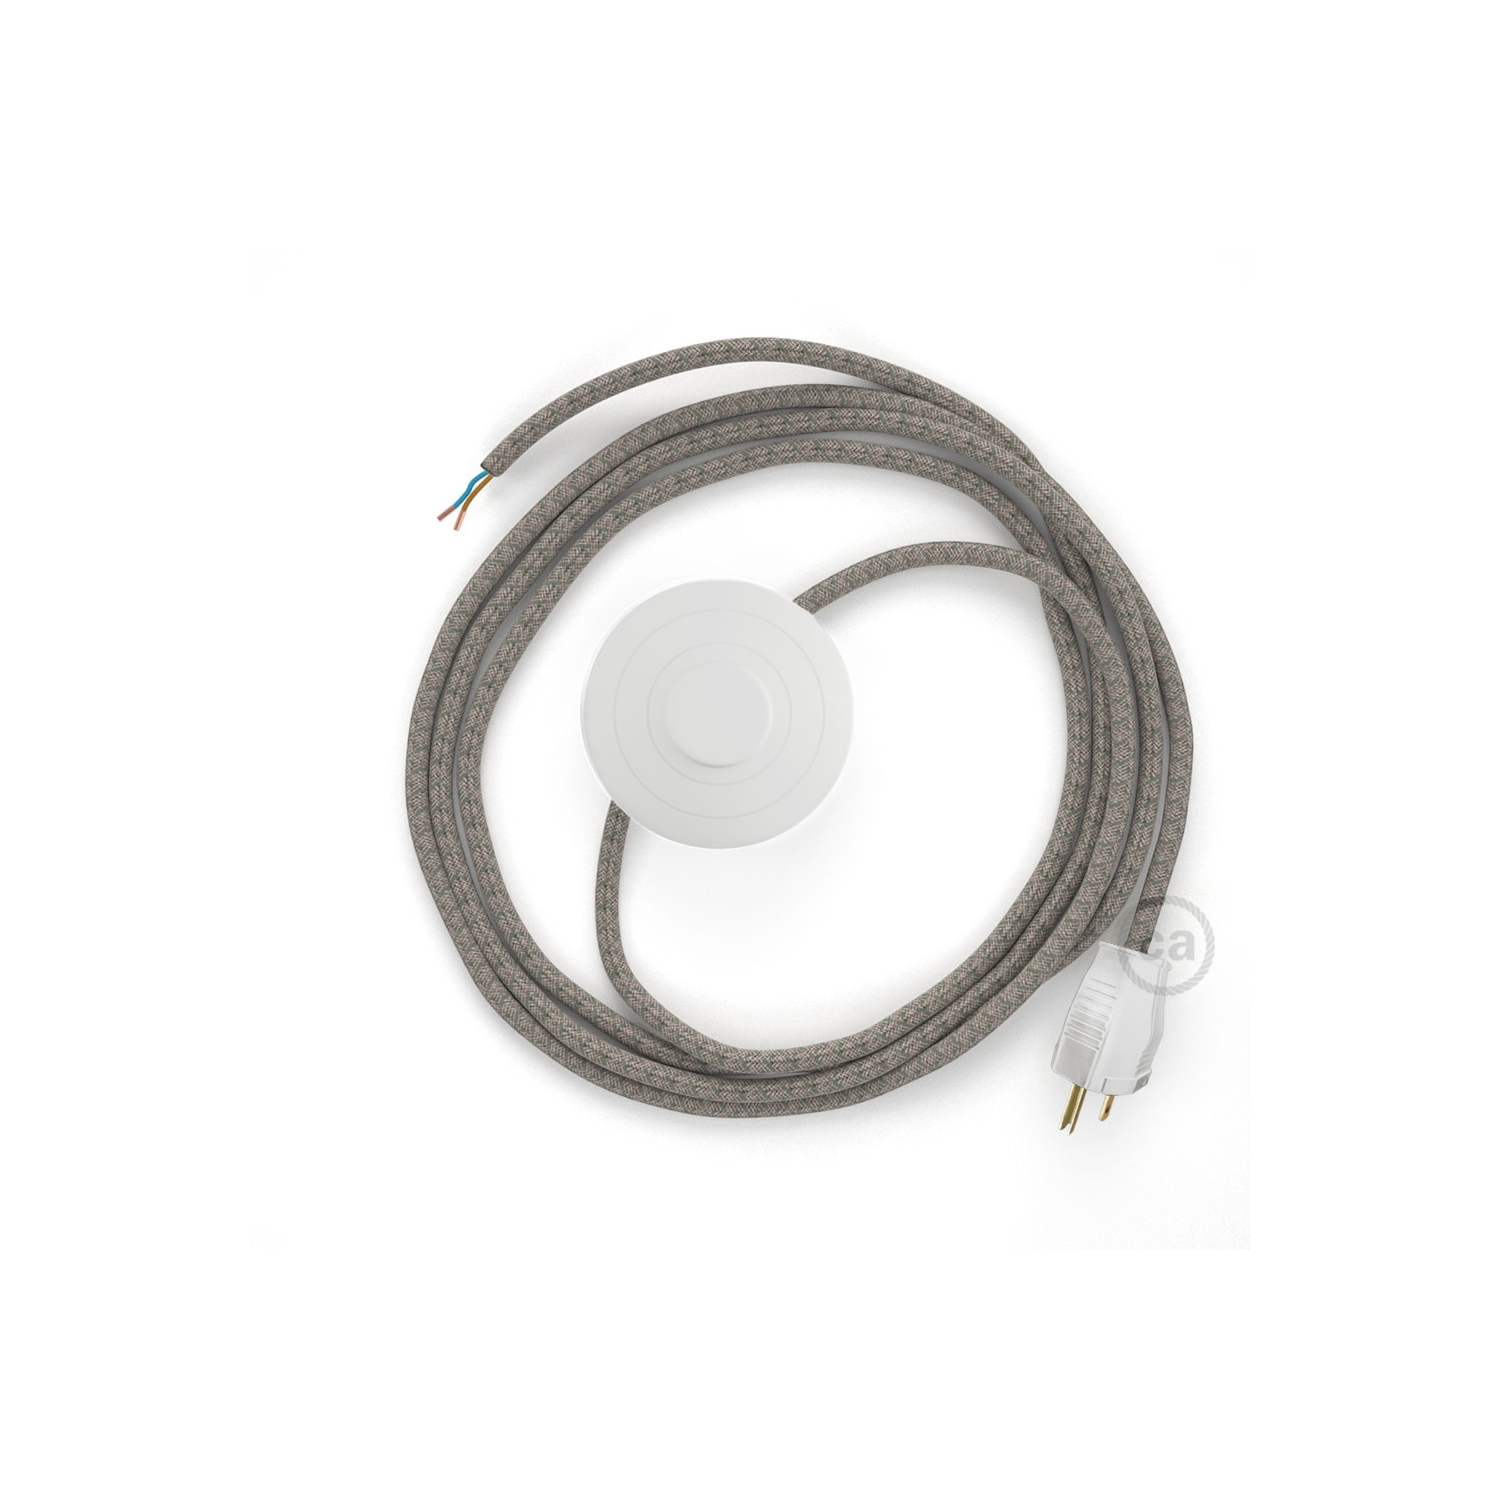 Power Cord with foot switch, RD62 Natural & Thyme Green Linen CrissCross - Choose color of switch/plug